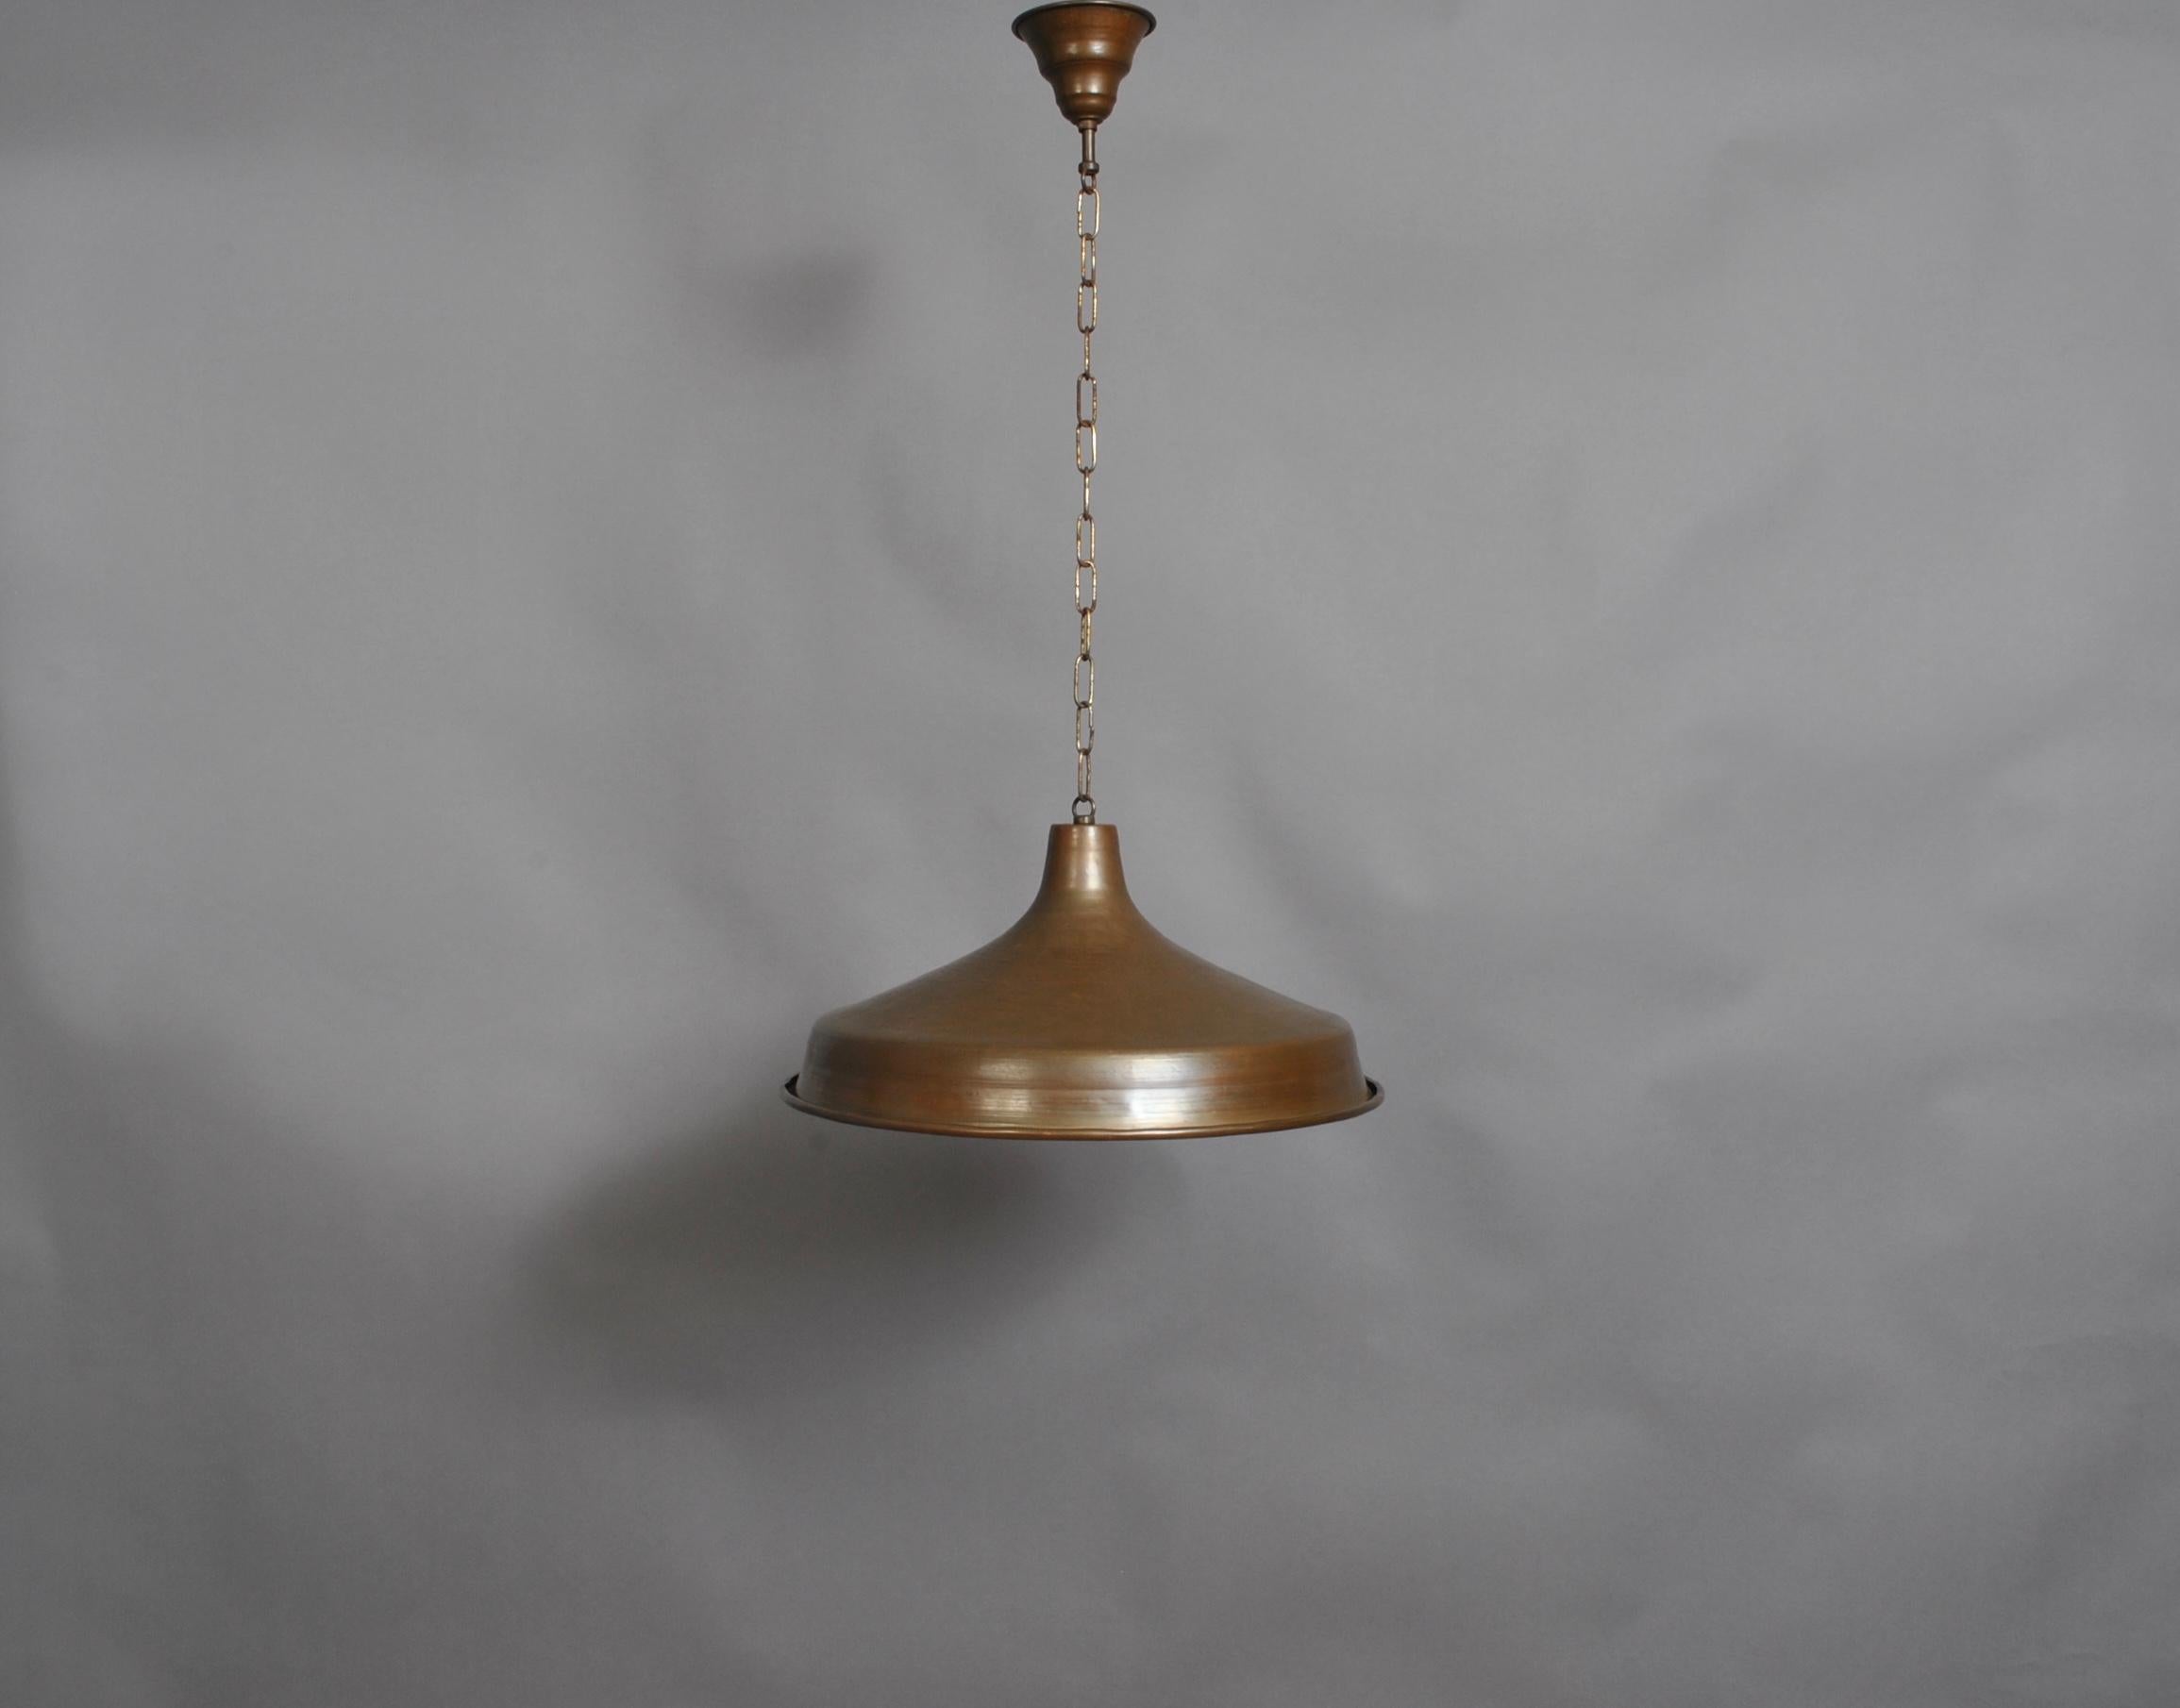 A large Danish copper pendant light. From the early to mid part of the 20th century. Wonderful aged patina, but could be polished to a high sheen. A longer/shorter hanging chain can be added if required.
Rewired.